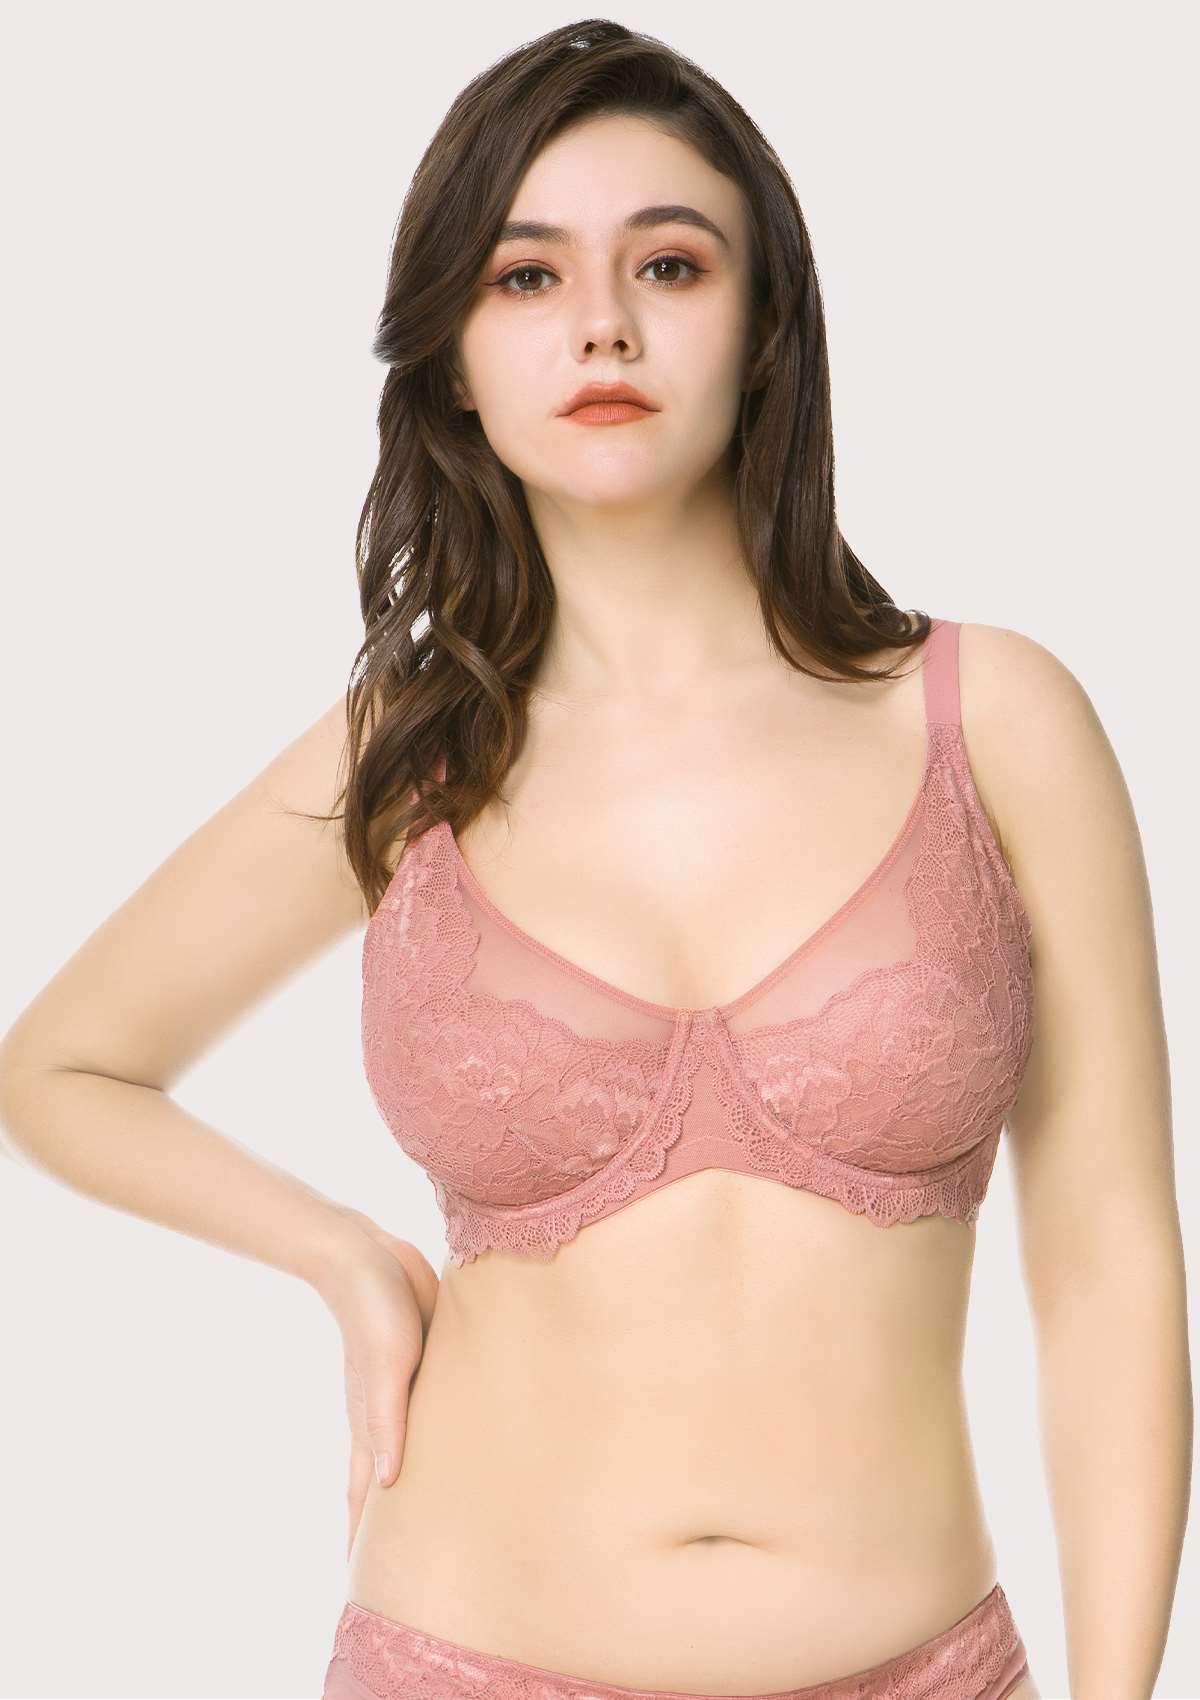 HSIA Peony Lace Unlined Supportive Underwire Bra - Green / 36 / DDD/F